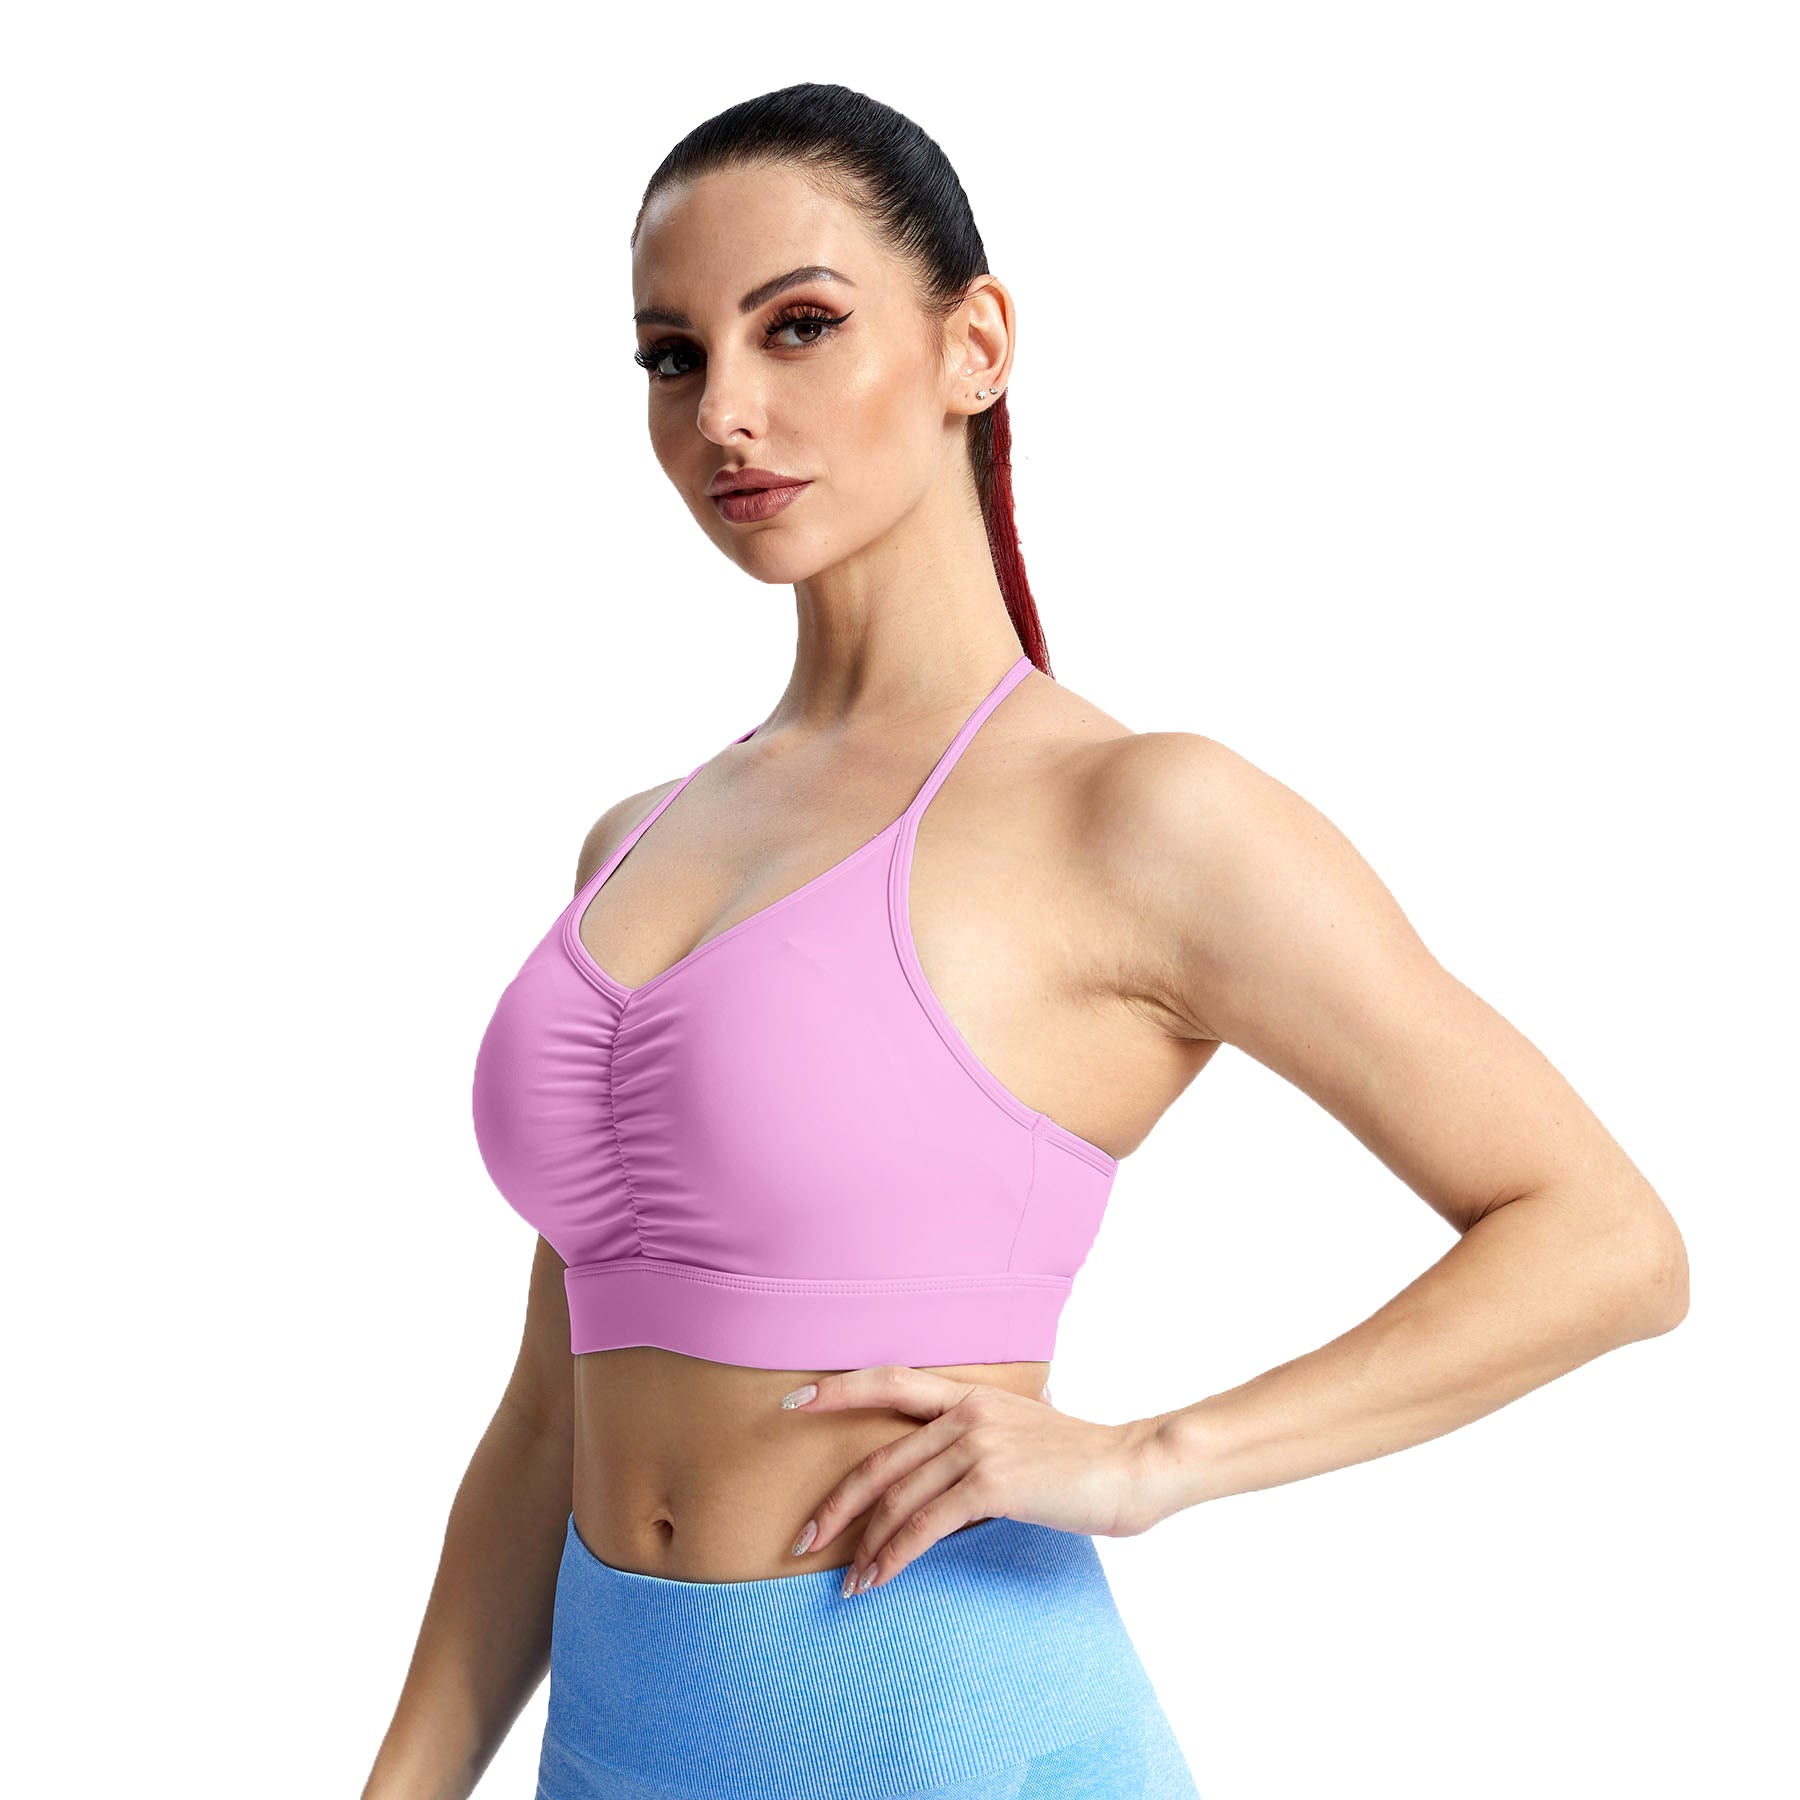 Aoxjox Ruched T back sling Bras